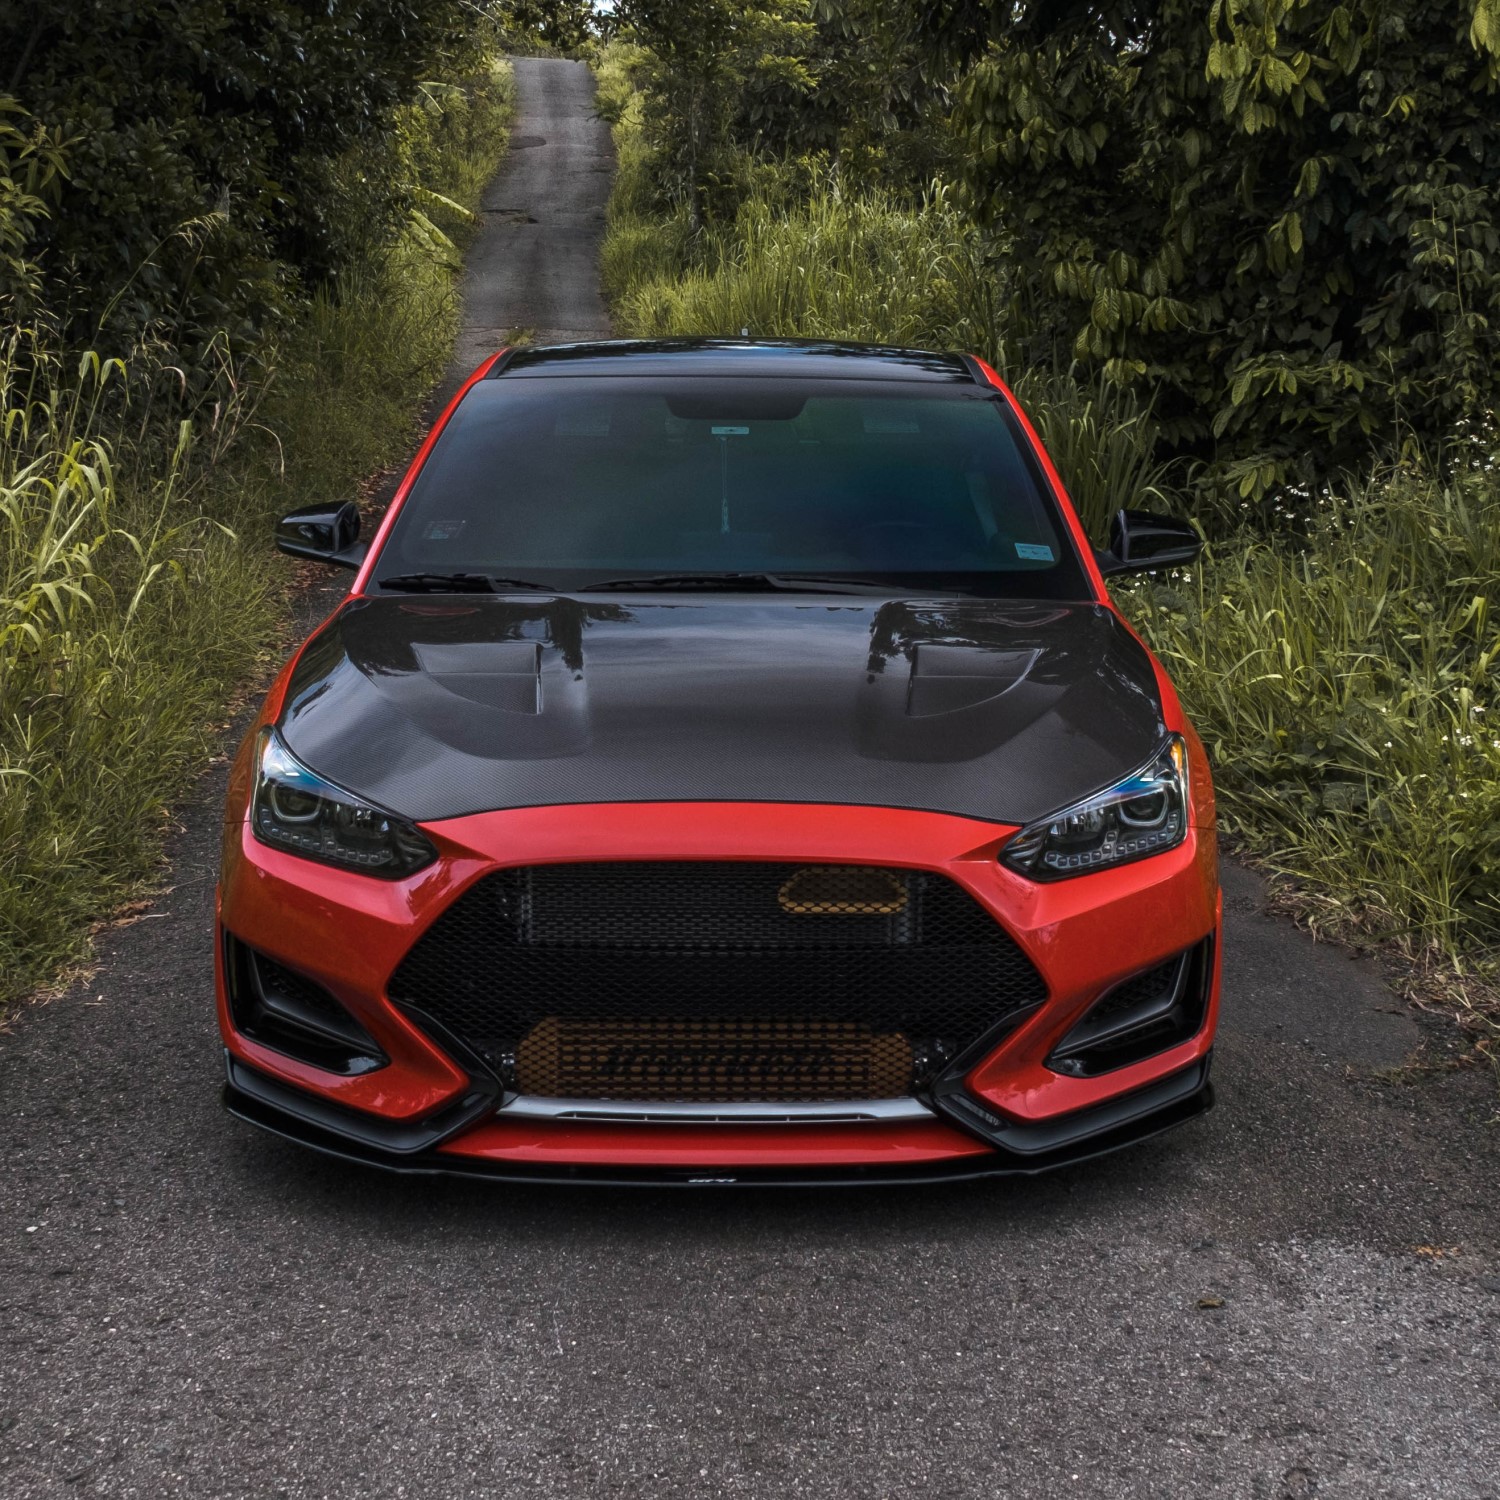 The Perfect Combo: Custom Mesh Grille and Carbon Fiber Hood for Your 2nd Gen Veloster